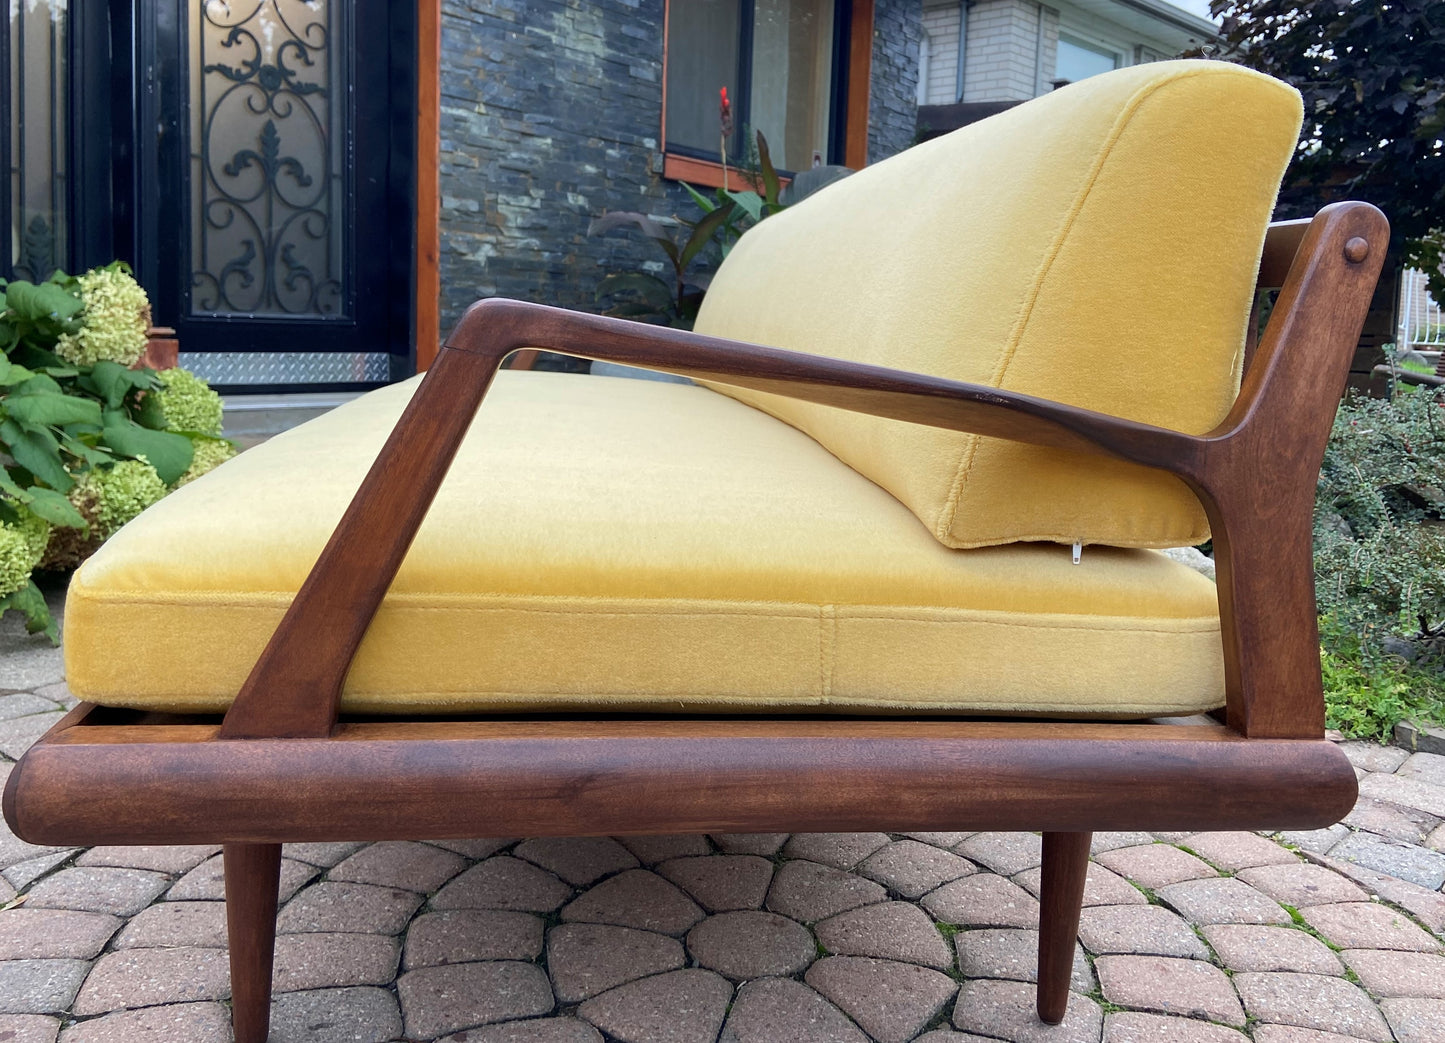 REFINISHED Mid Century Modern Daybed Sofa by A. Pearsall, NEW CUSHIONS in Wool Mohair